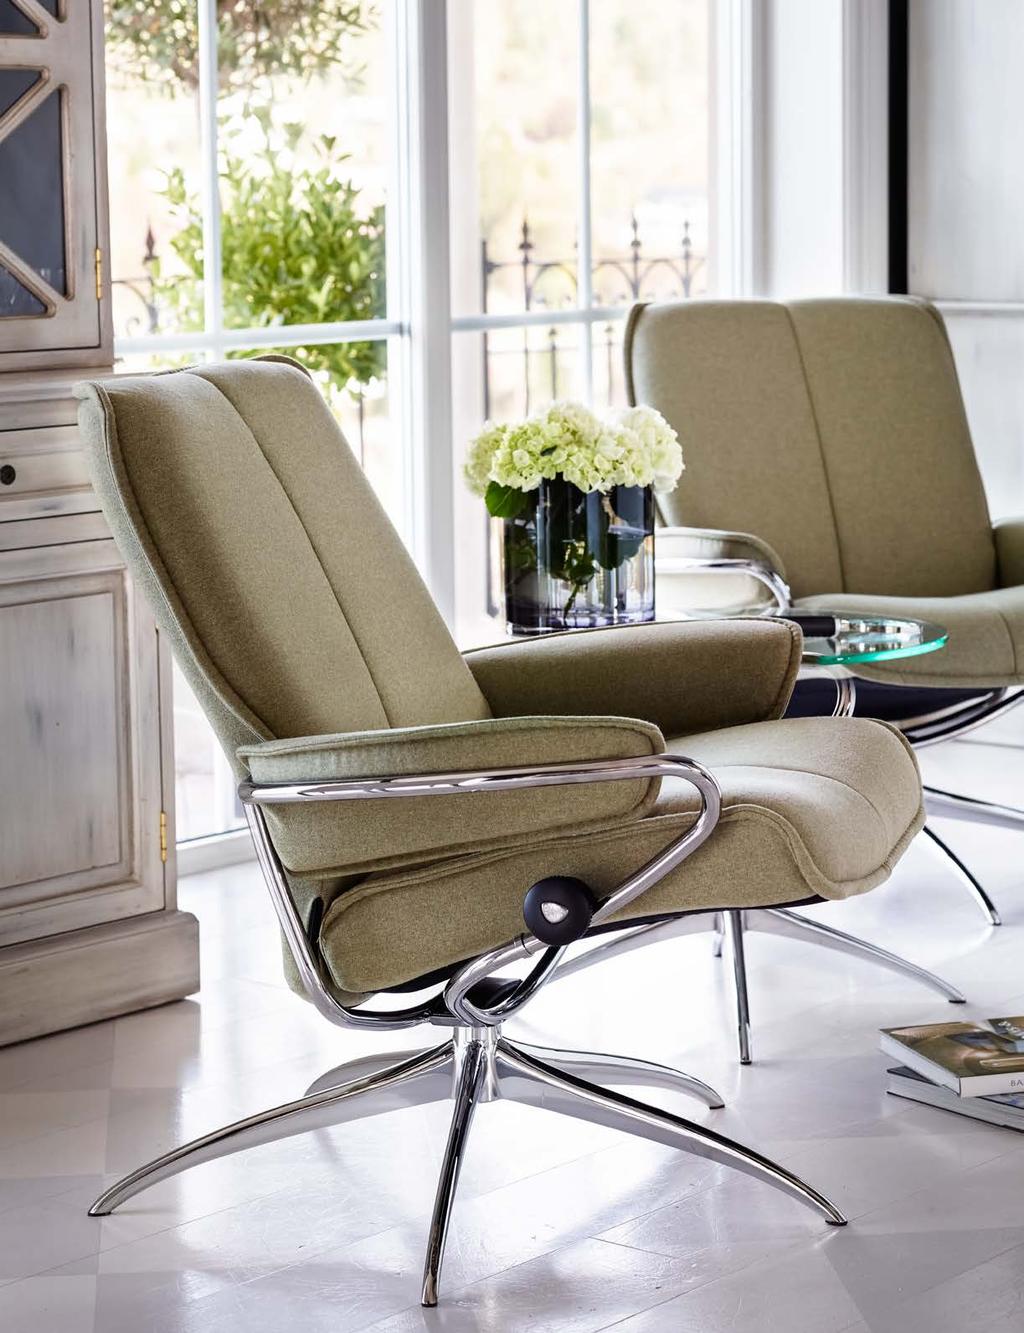 16/17 Stressless City Low Back recliners shown in fabric Calido Light Green.